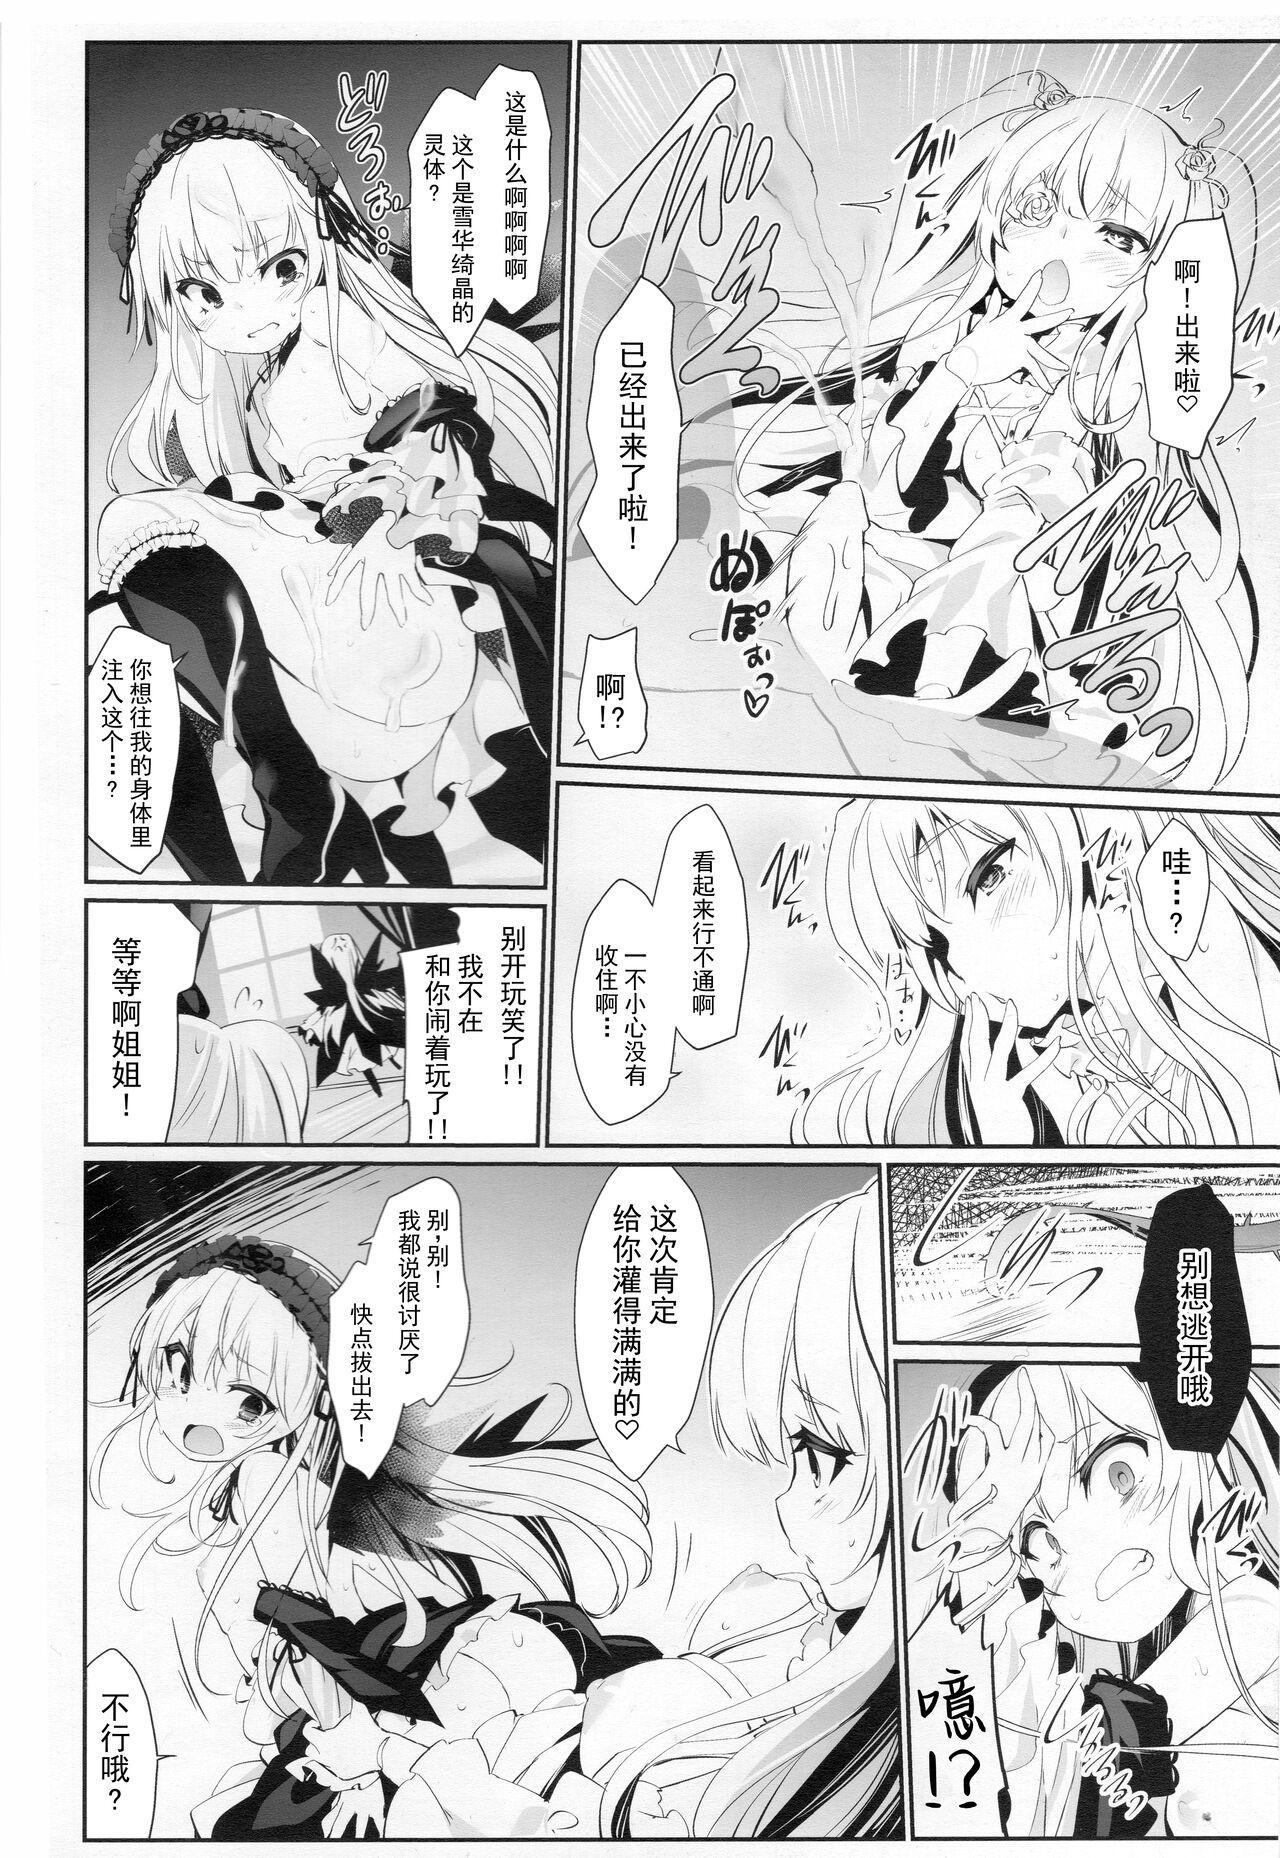 Lezbi Glamour Growth - Rozen maiden Family Taboo - Page 7